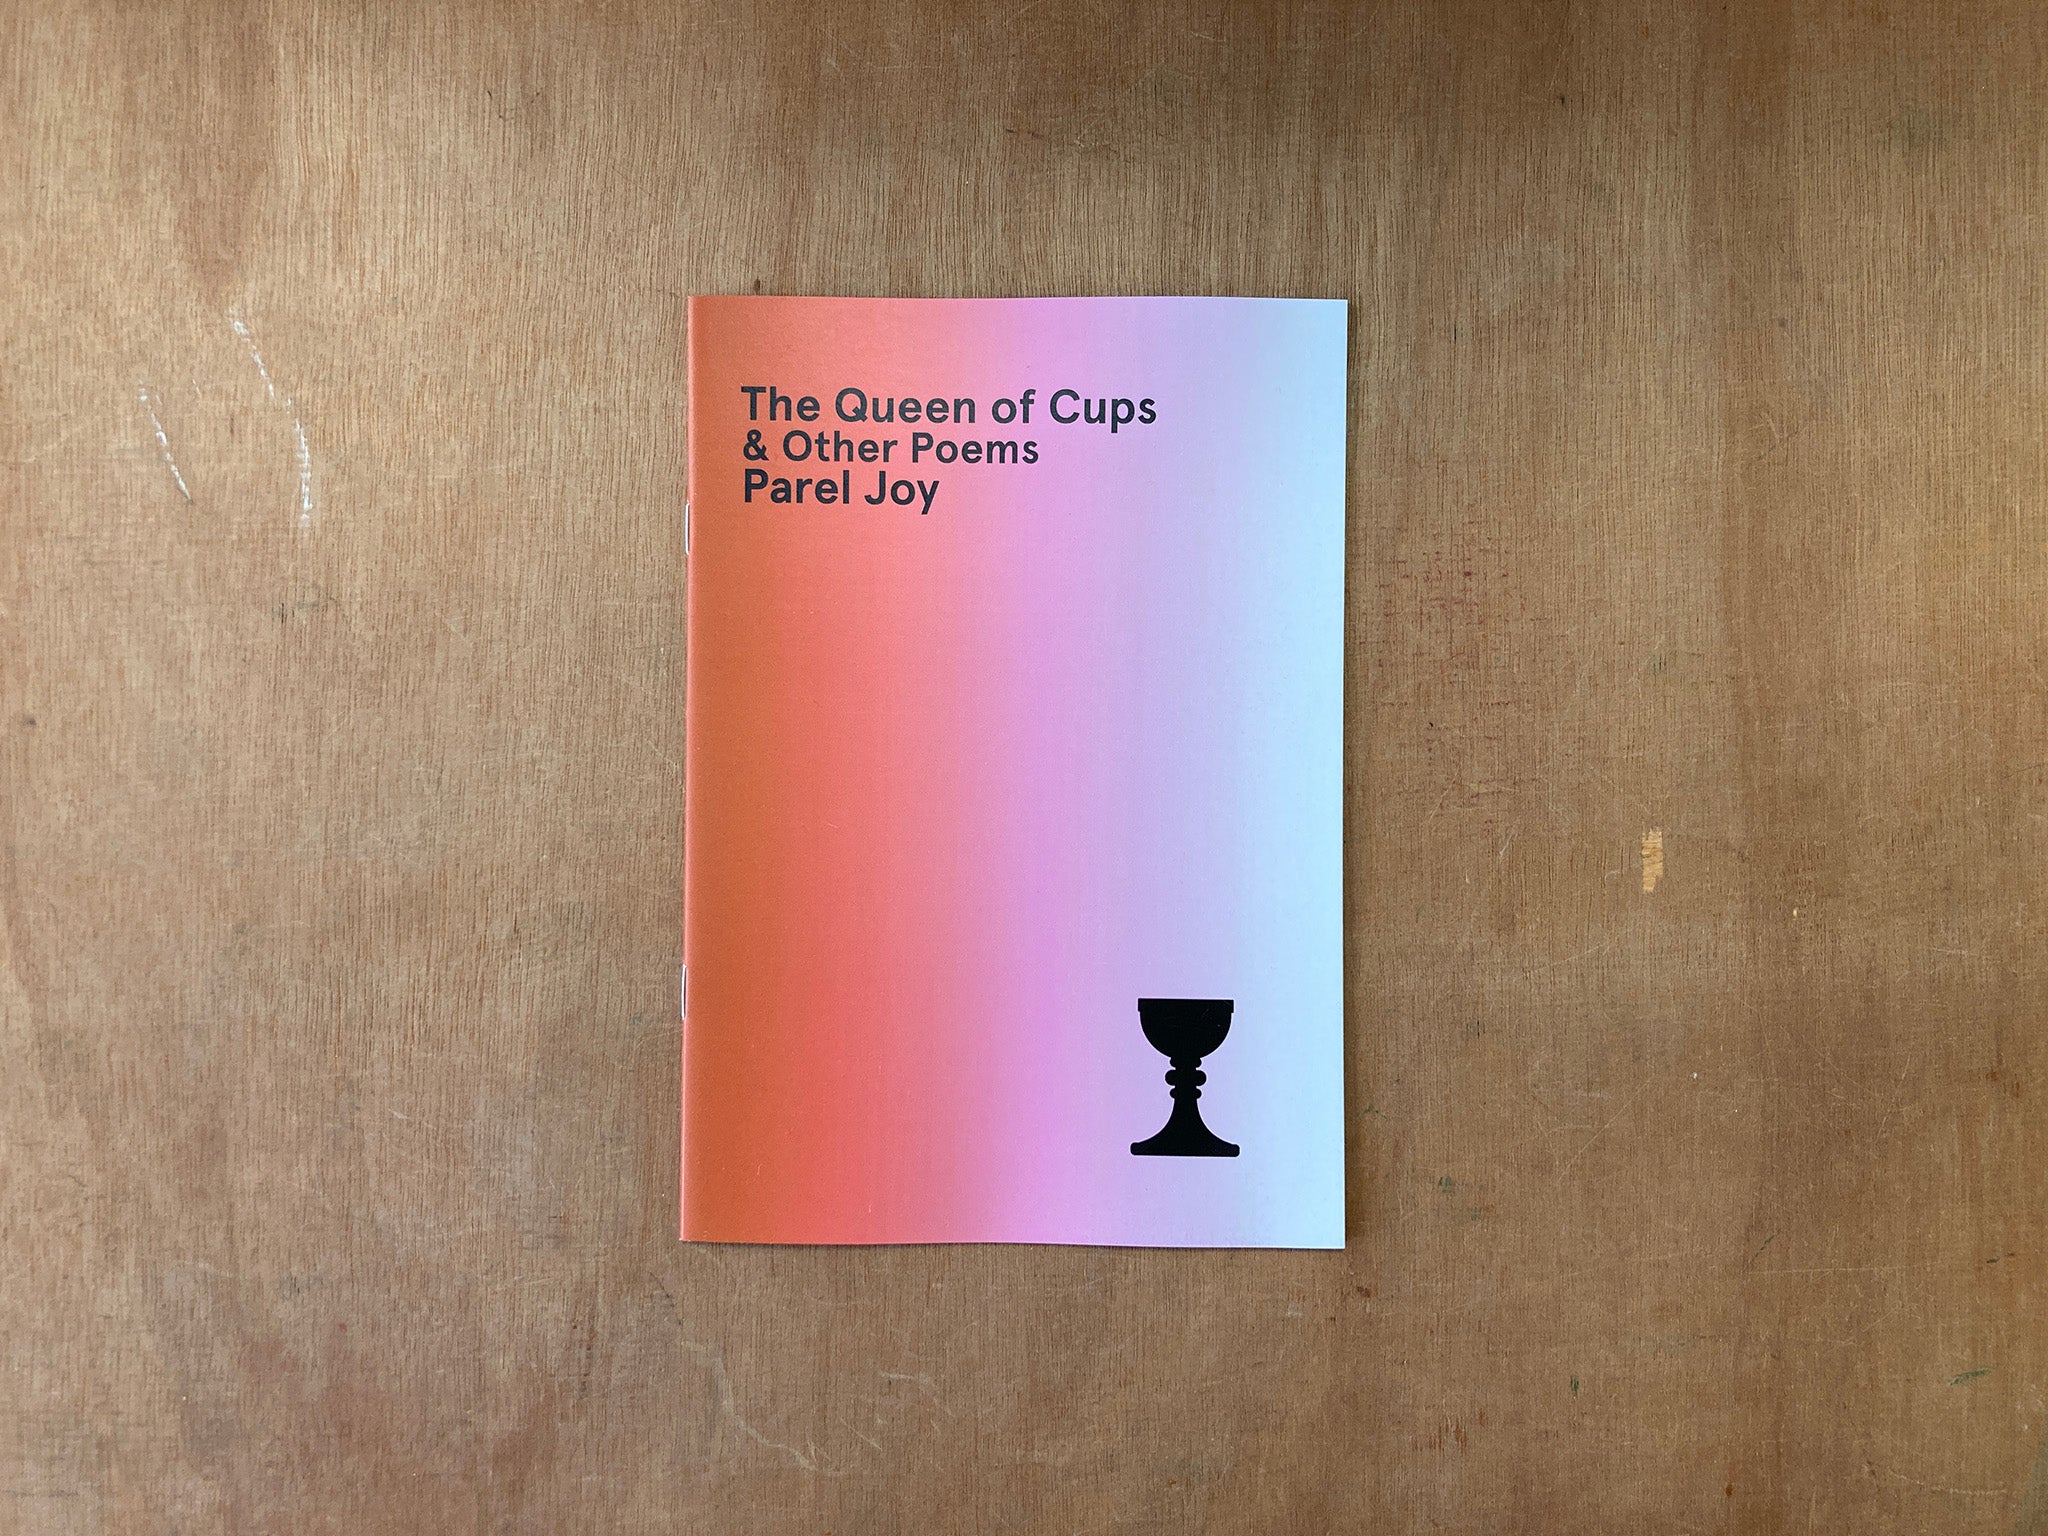 THE QUEEN OF CUPS AND OTHER POEMS by Parel Joy